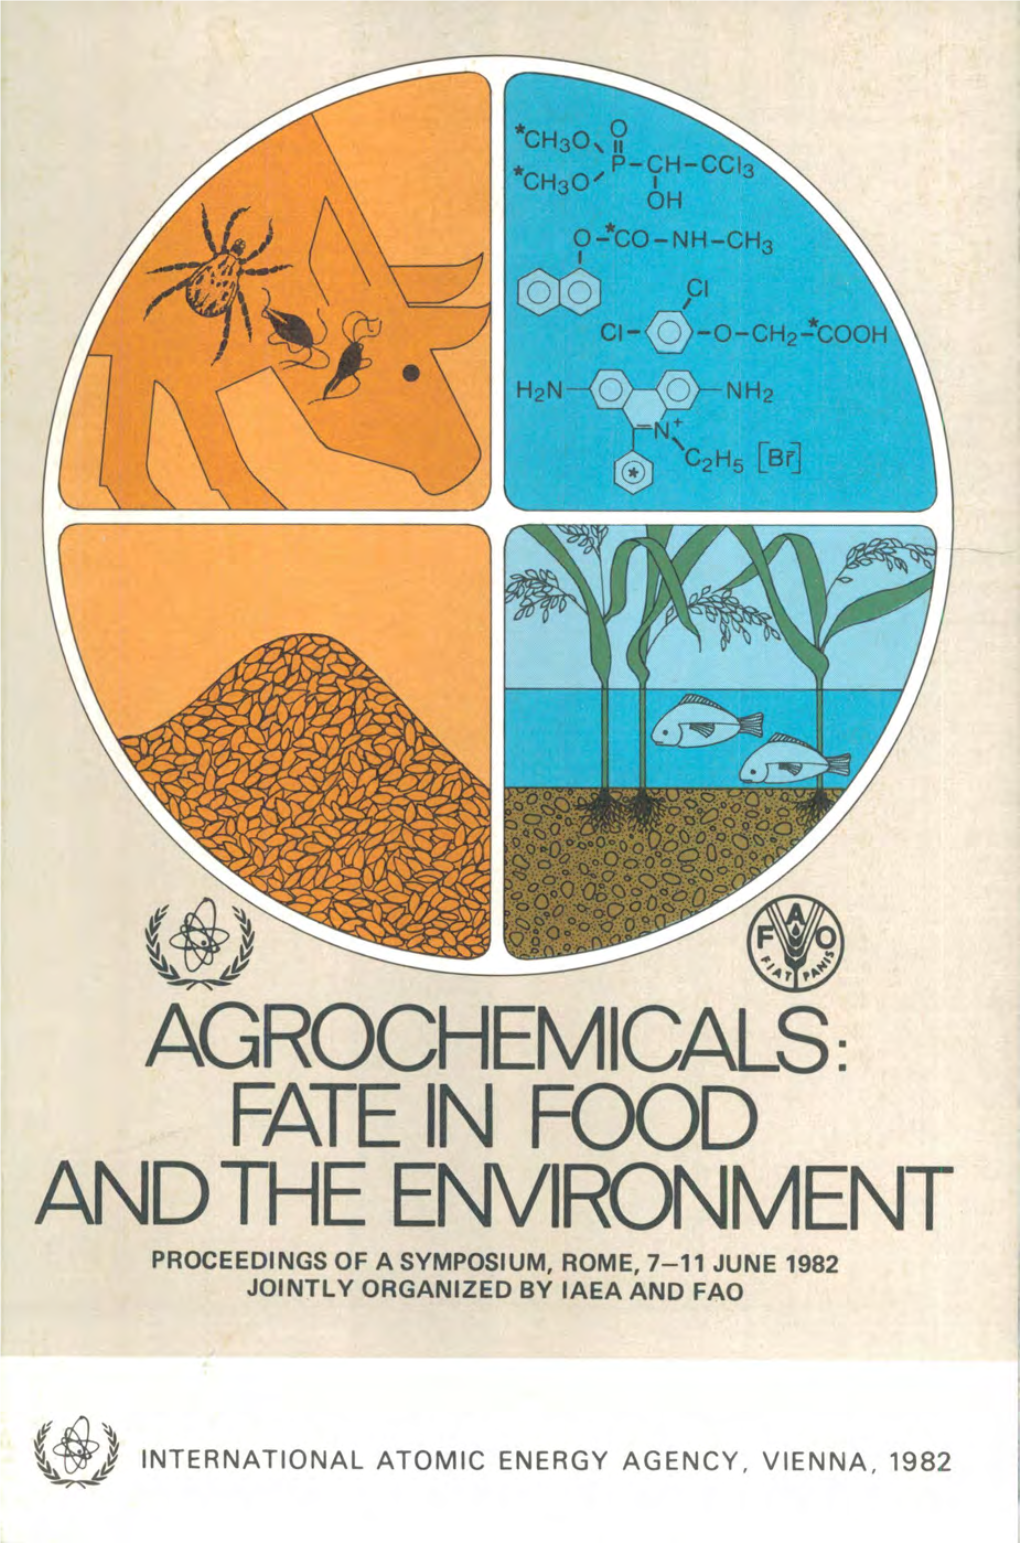 Agrochemicals: Fate in Food and the Environment Proceedings of a Symposium, Rome, 7-11 June 1982 Jointly Organized by Iaea and Fao